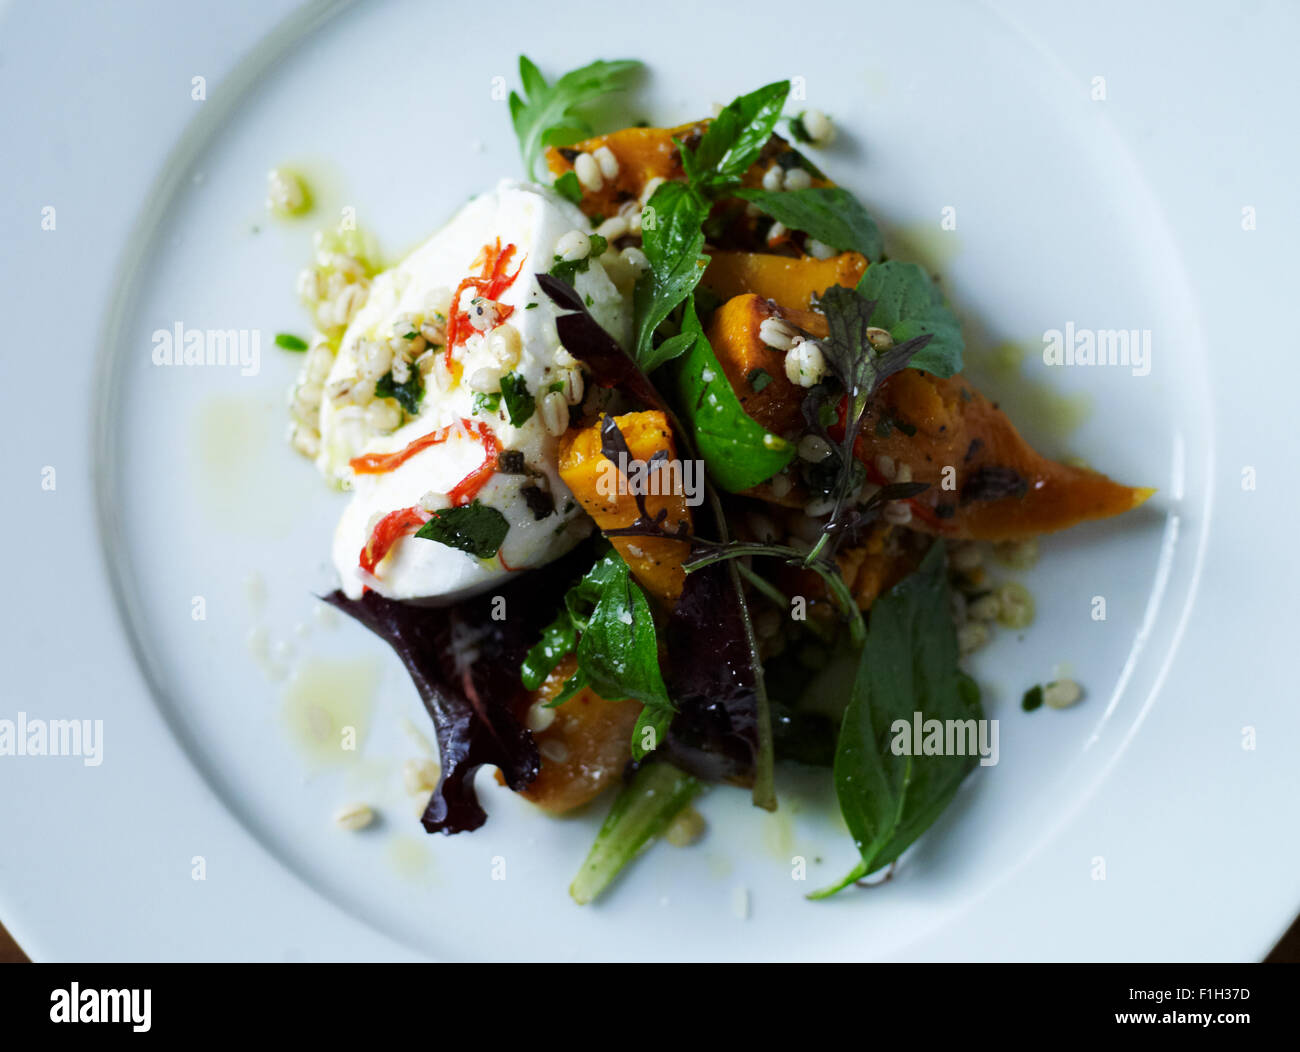 A salad of egg white , salad leaves, aubergine, and rice, served on a white plate. Stock Photo